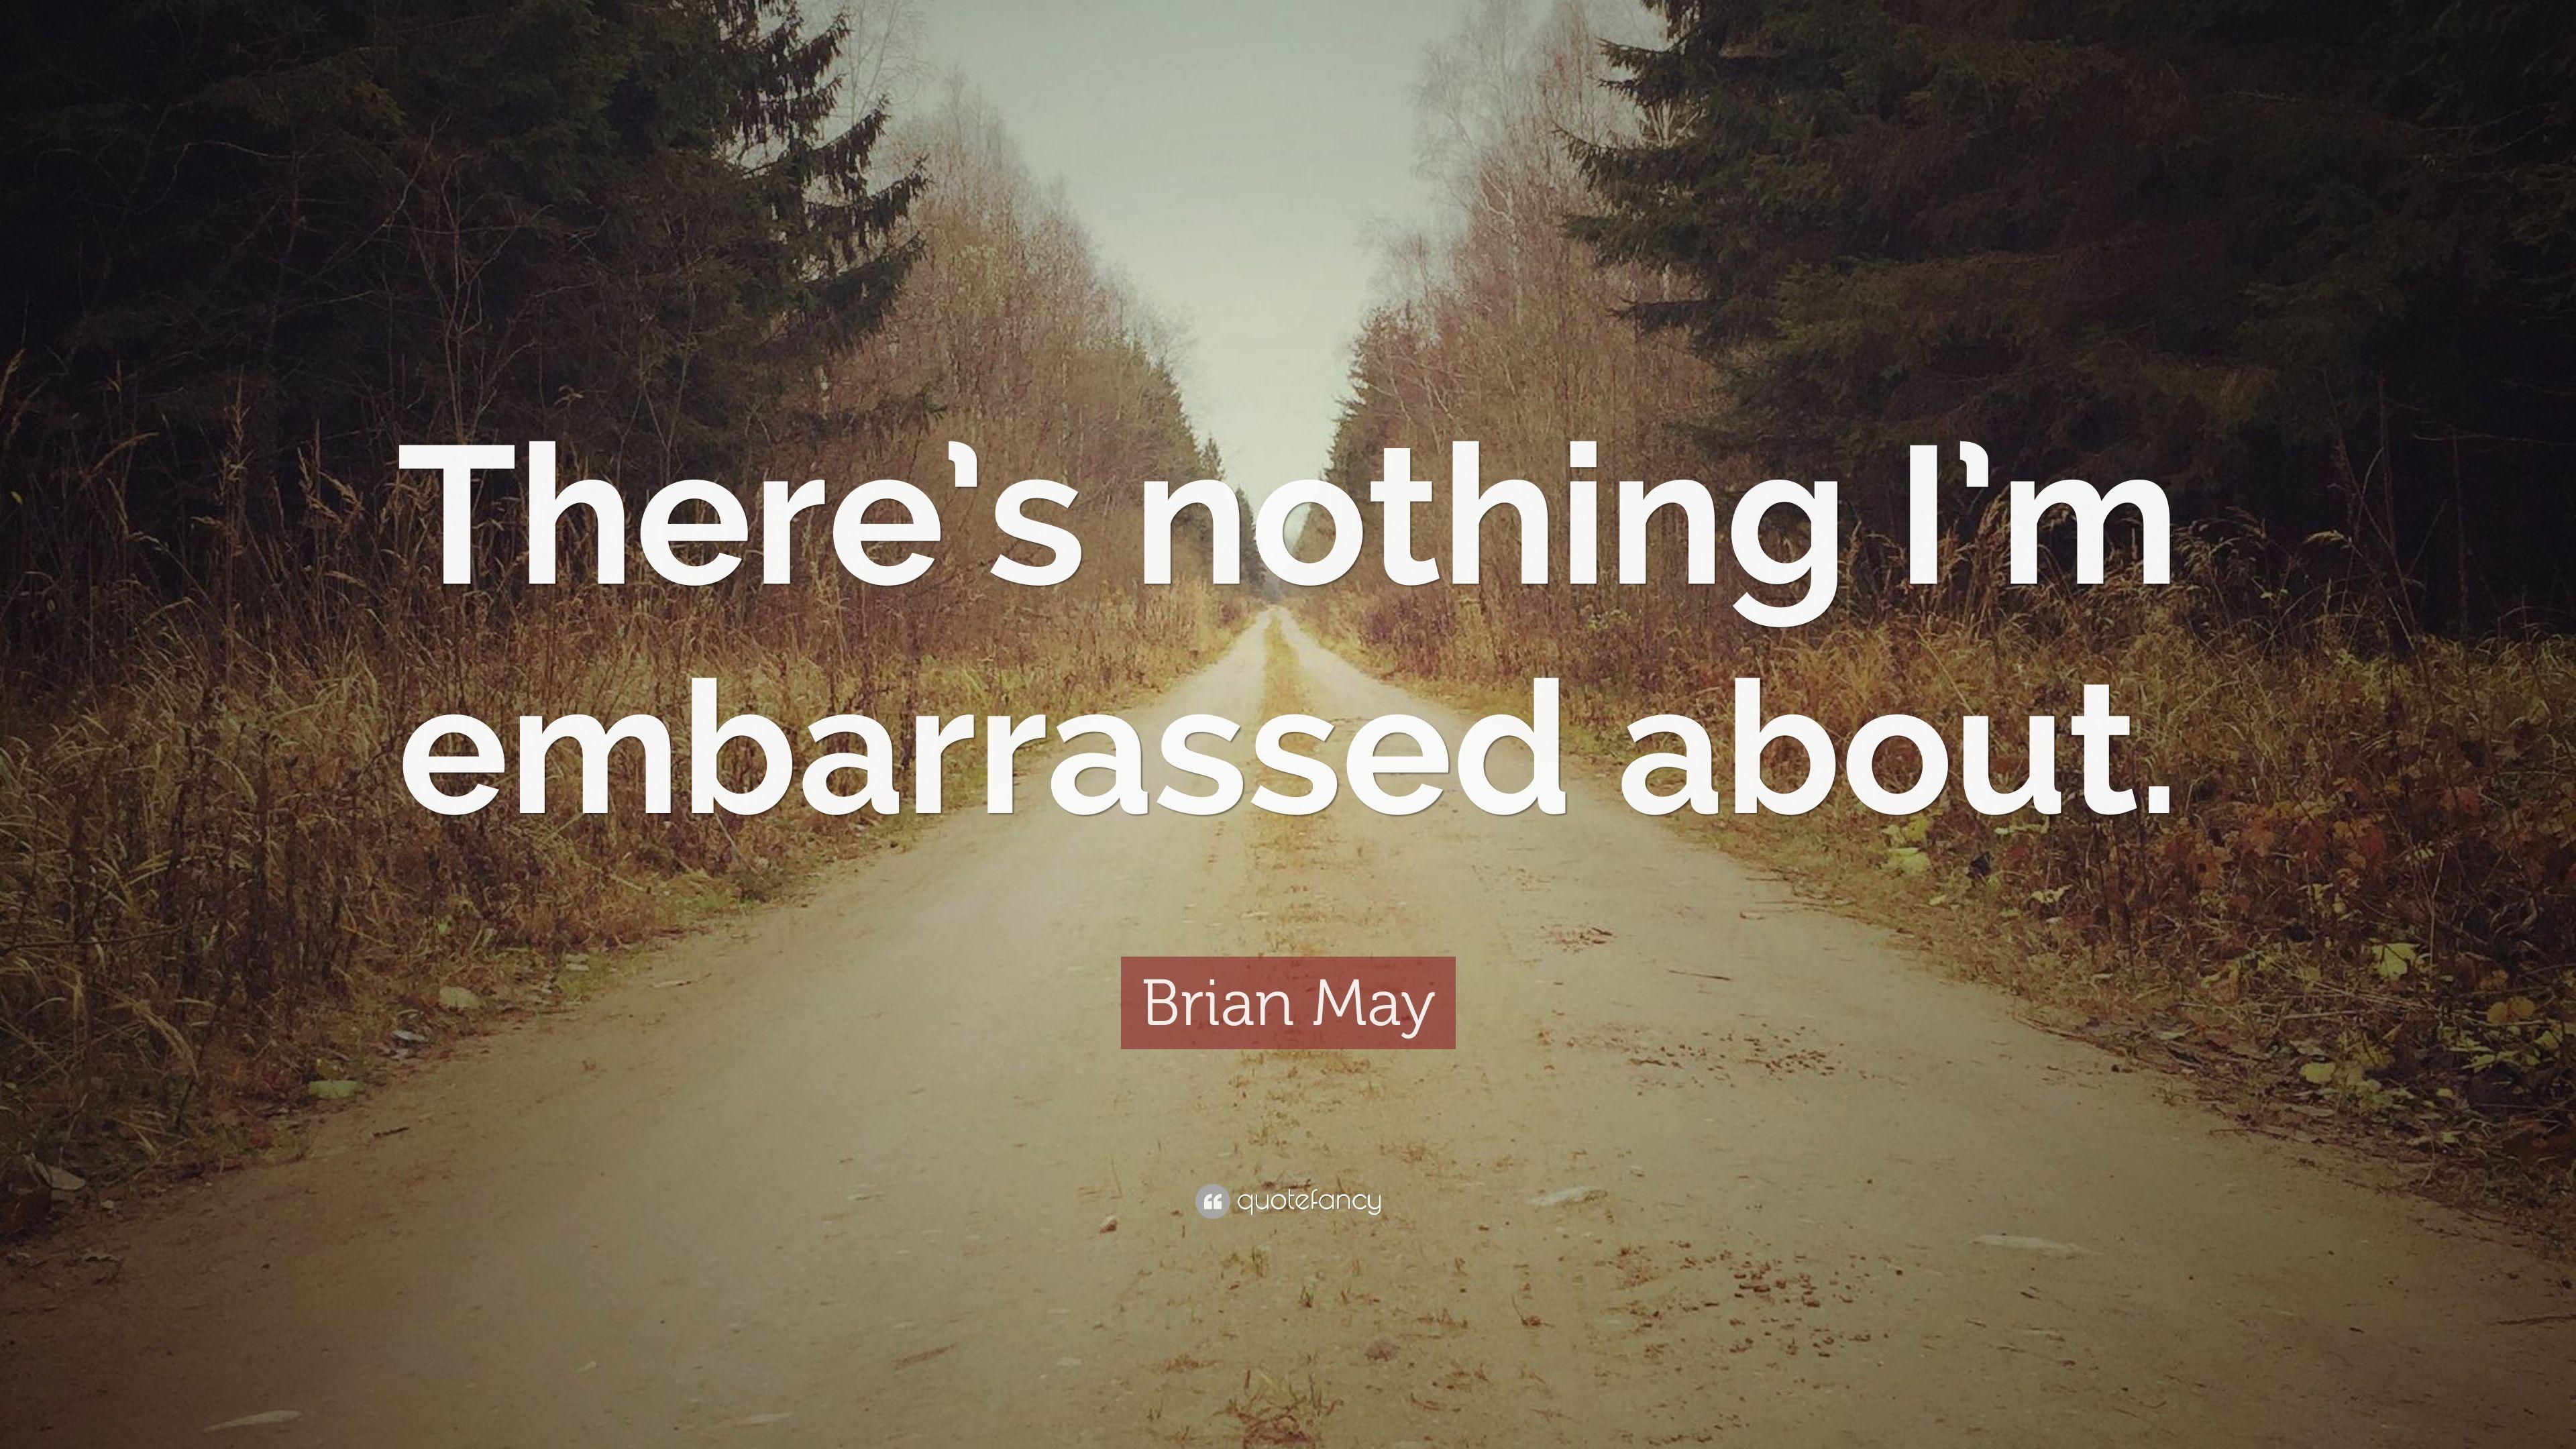 Brian May Quote: “There's nothing I'm embarrassed about.” 5